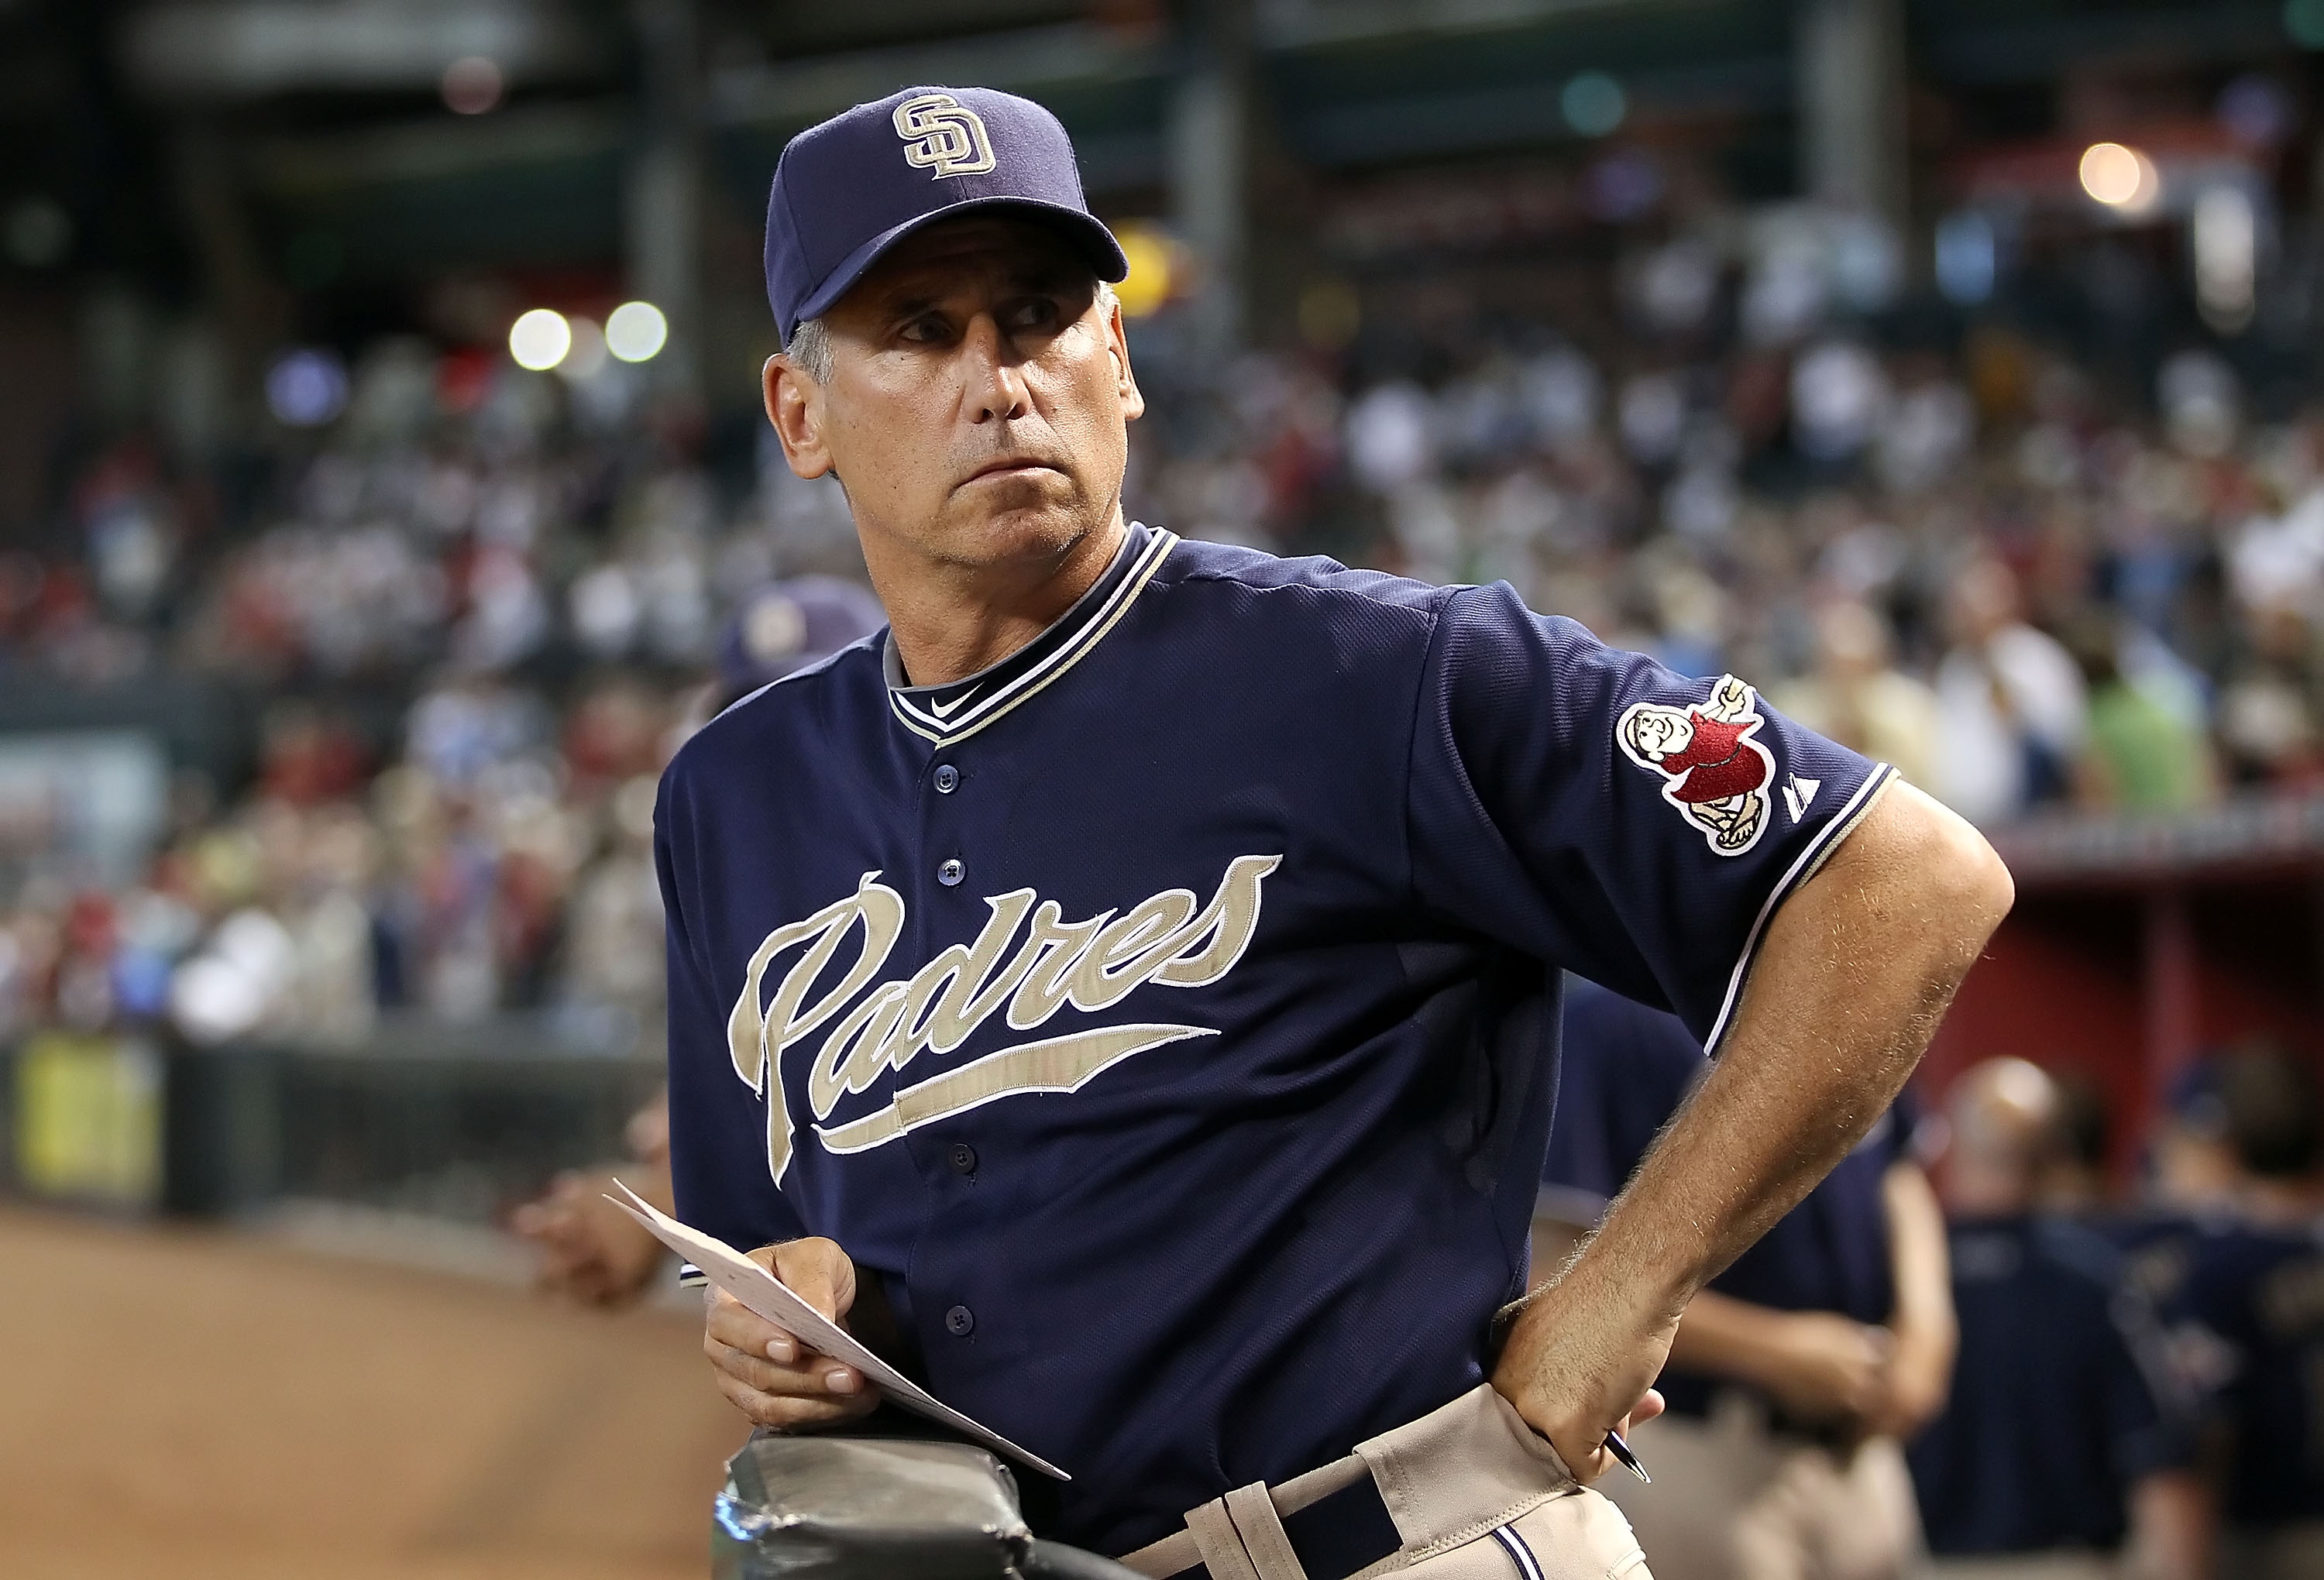 San Diego Padres' Bud Black Wins 2010 Manager of the Year Award